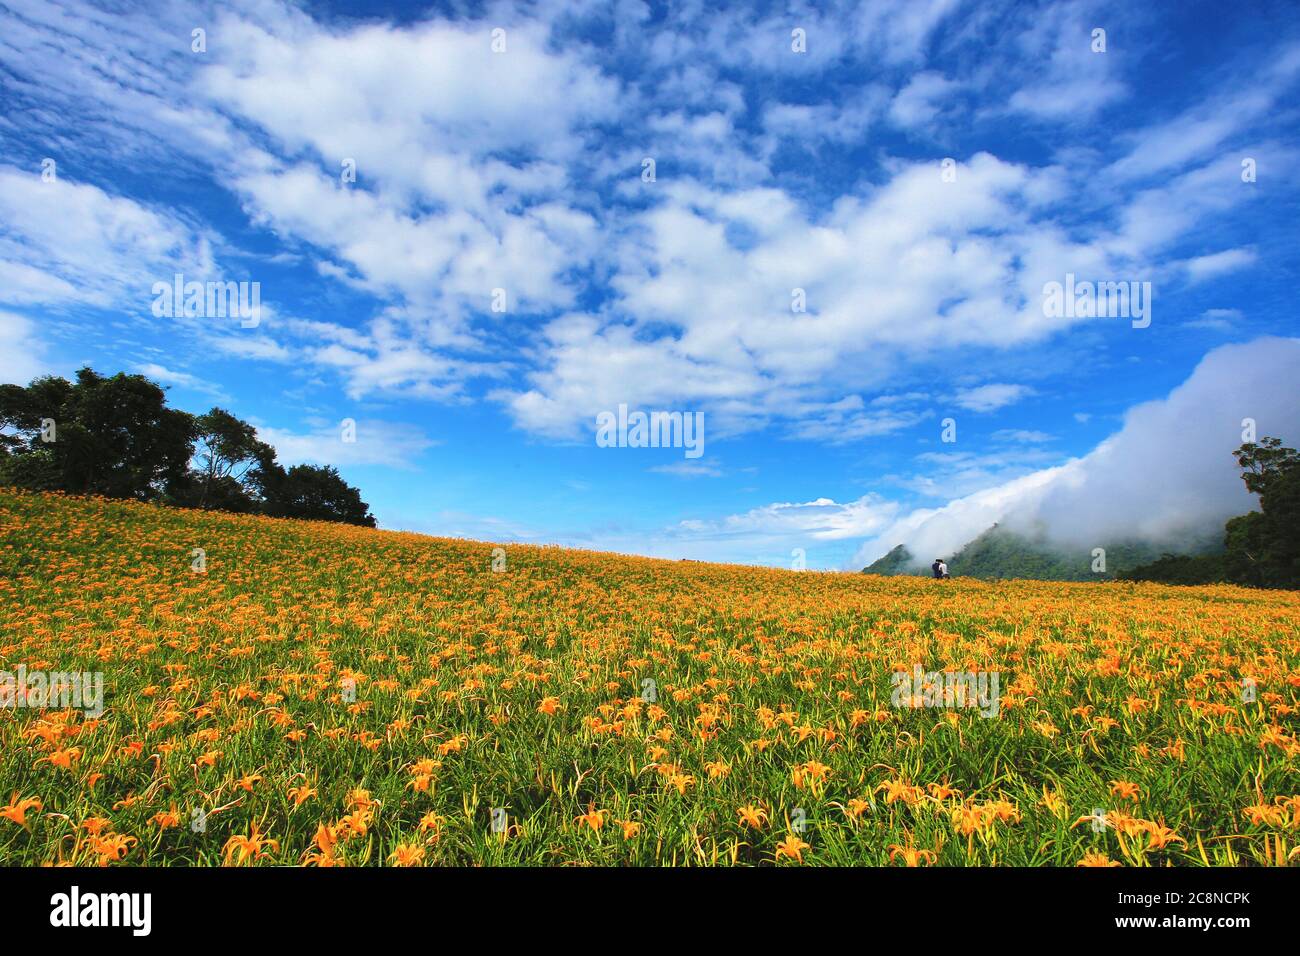 Daylily flowers and buds blooming on the hill,beautiful scenery of orange hemerocallis flowers and sky cloud Stock Photo